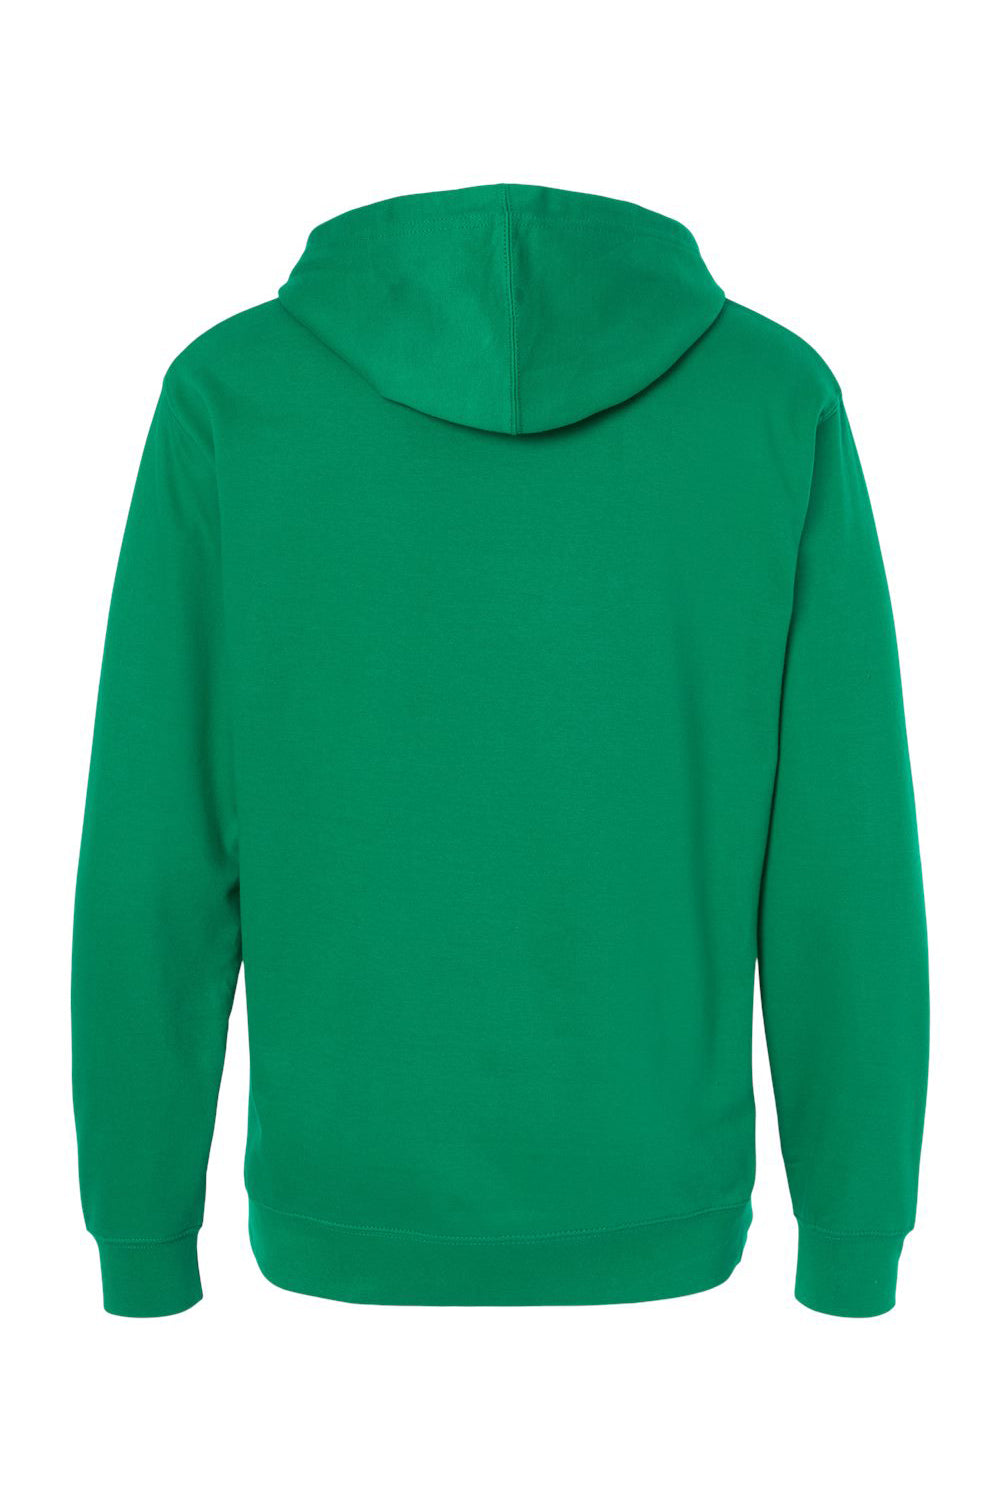 Independent Trading Co. SS4500 Mens Hooded Sweatshirt Hoodie Kelly Green Flat Back